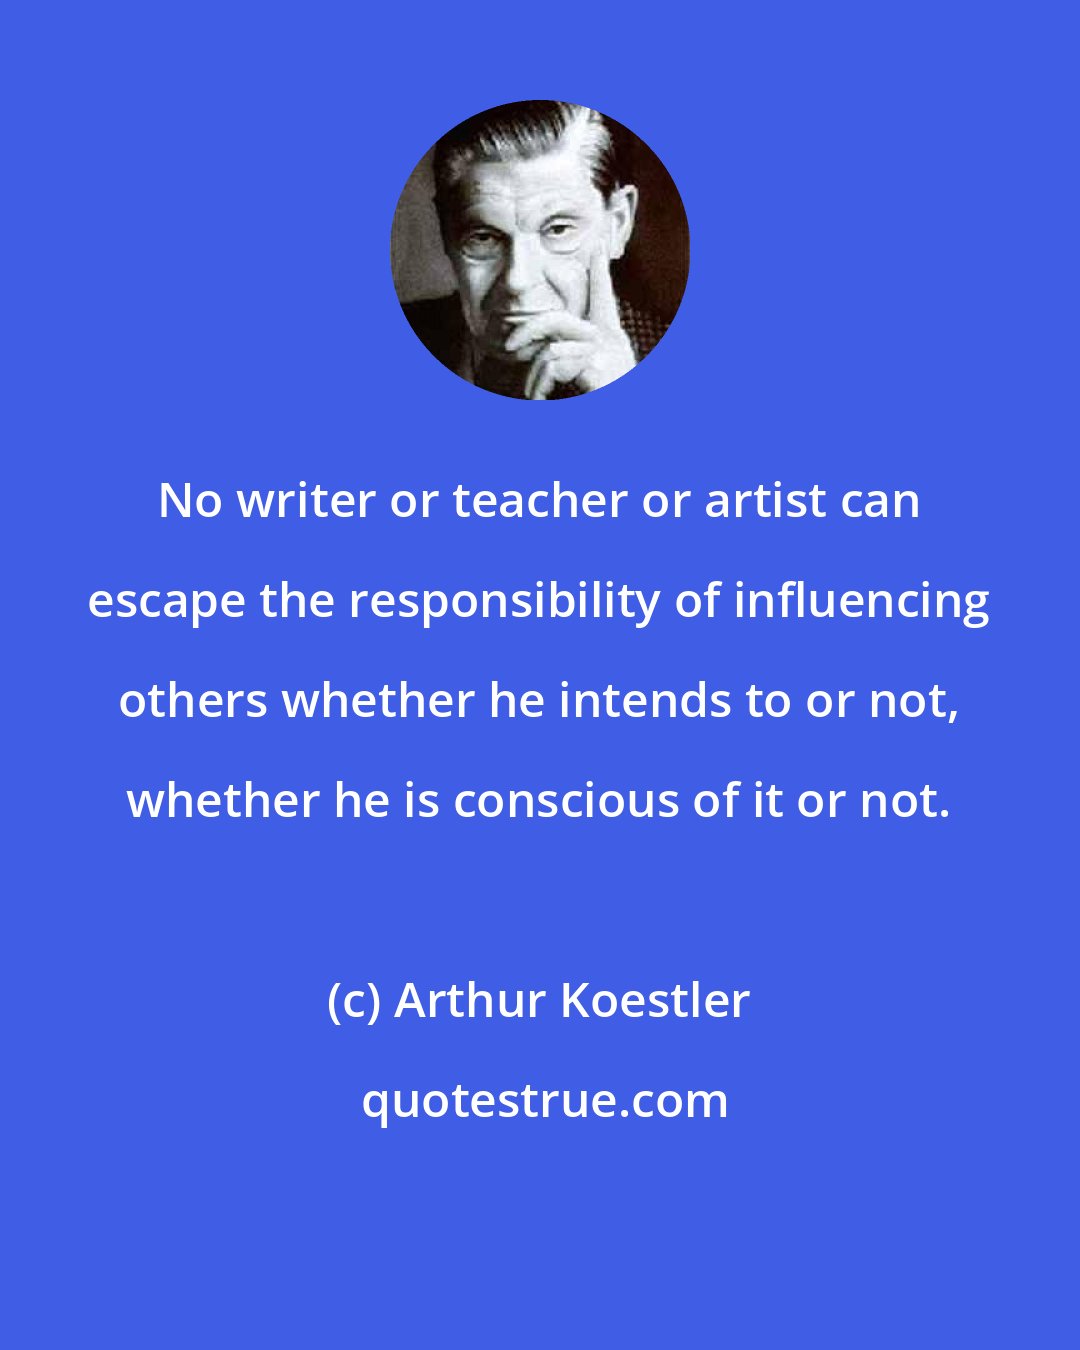 Arthur Koestler: No writer or teacher or artist can escape the responsibility of influencing others whether he intends to or not, whether he is conscious of it or not.